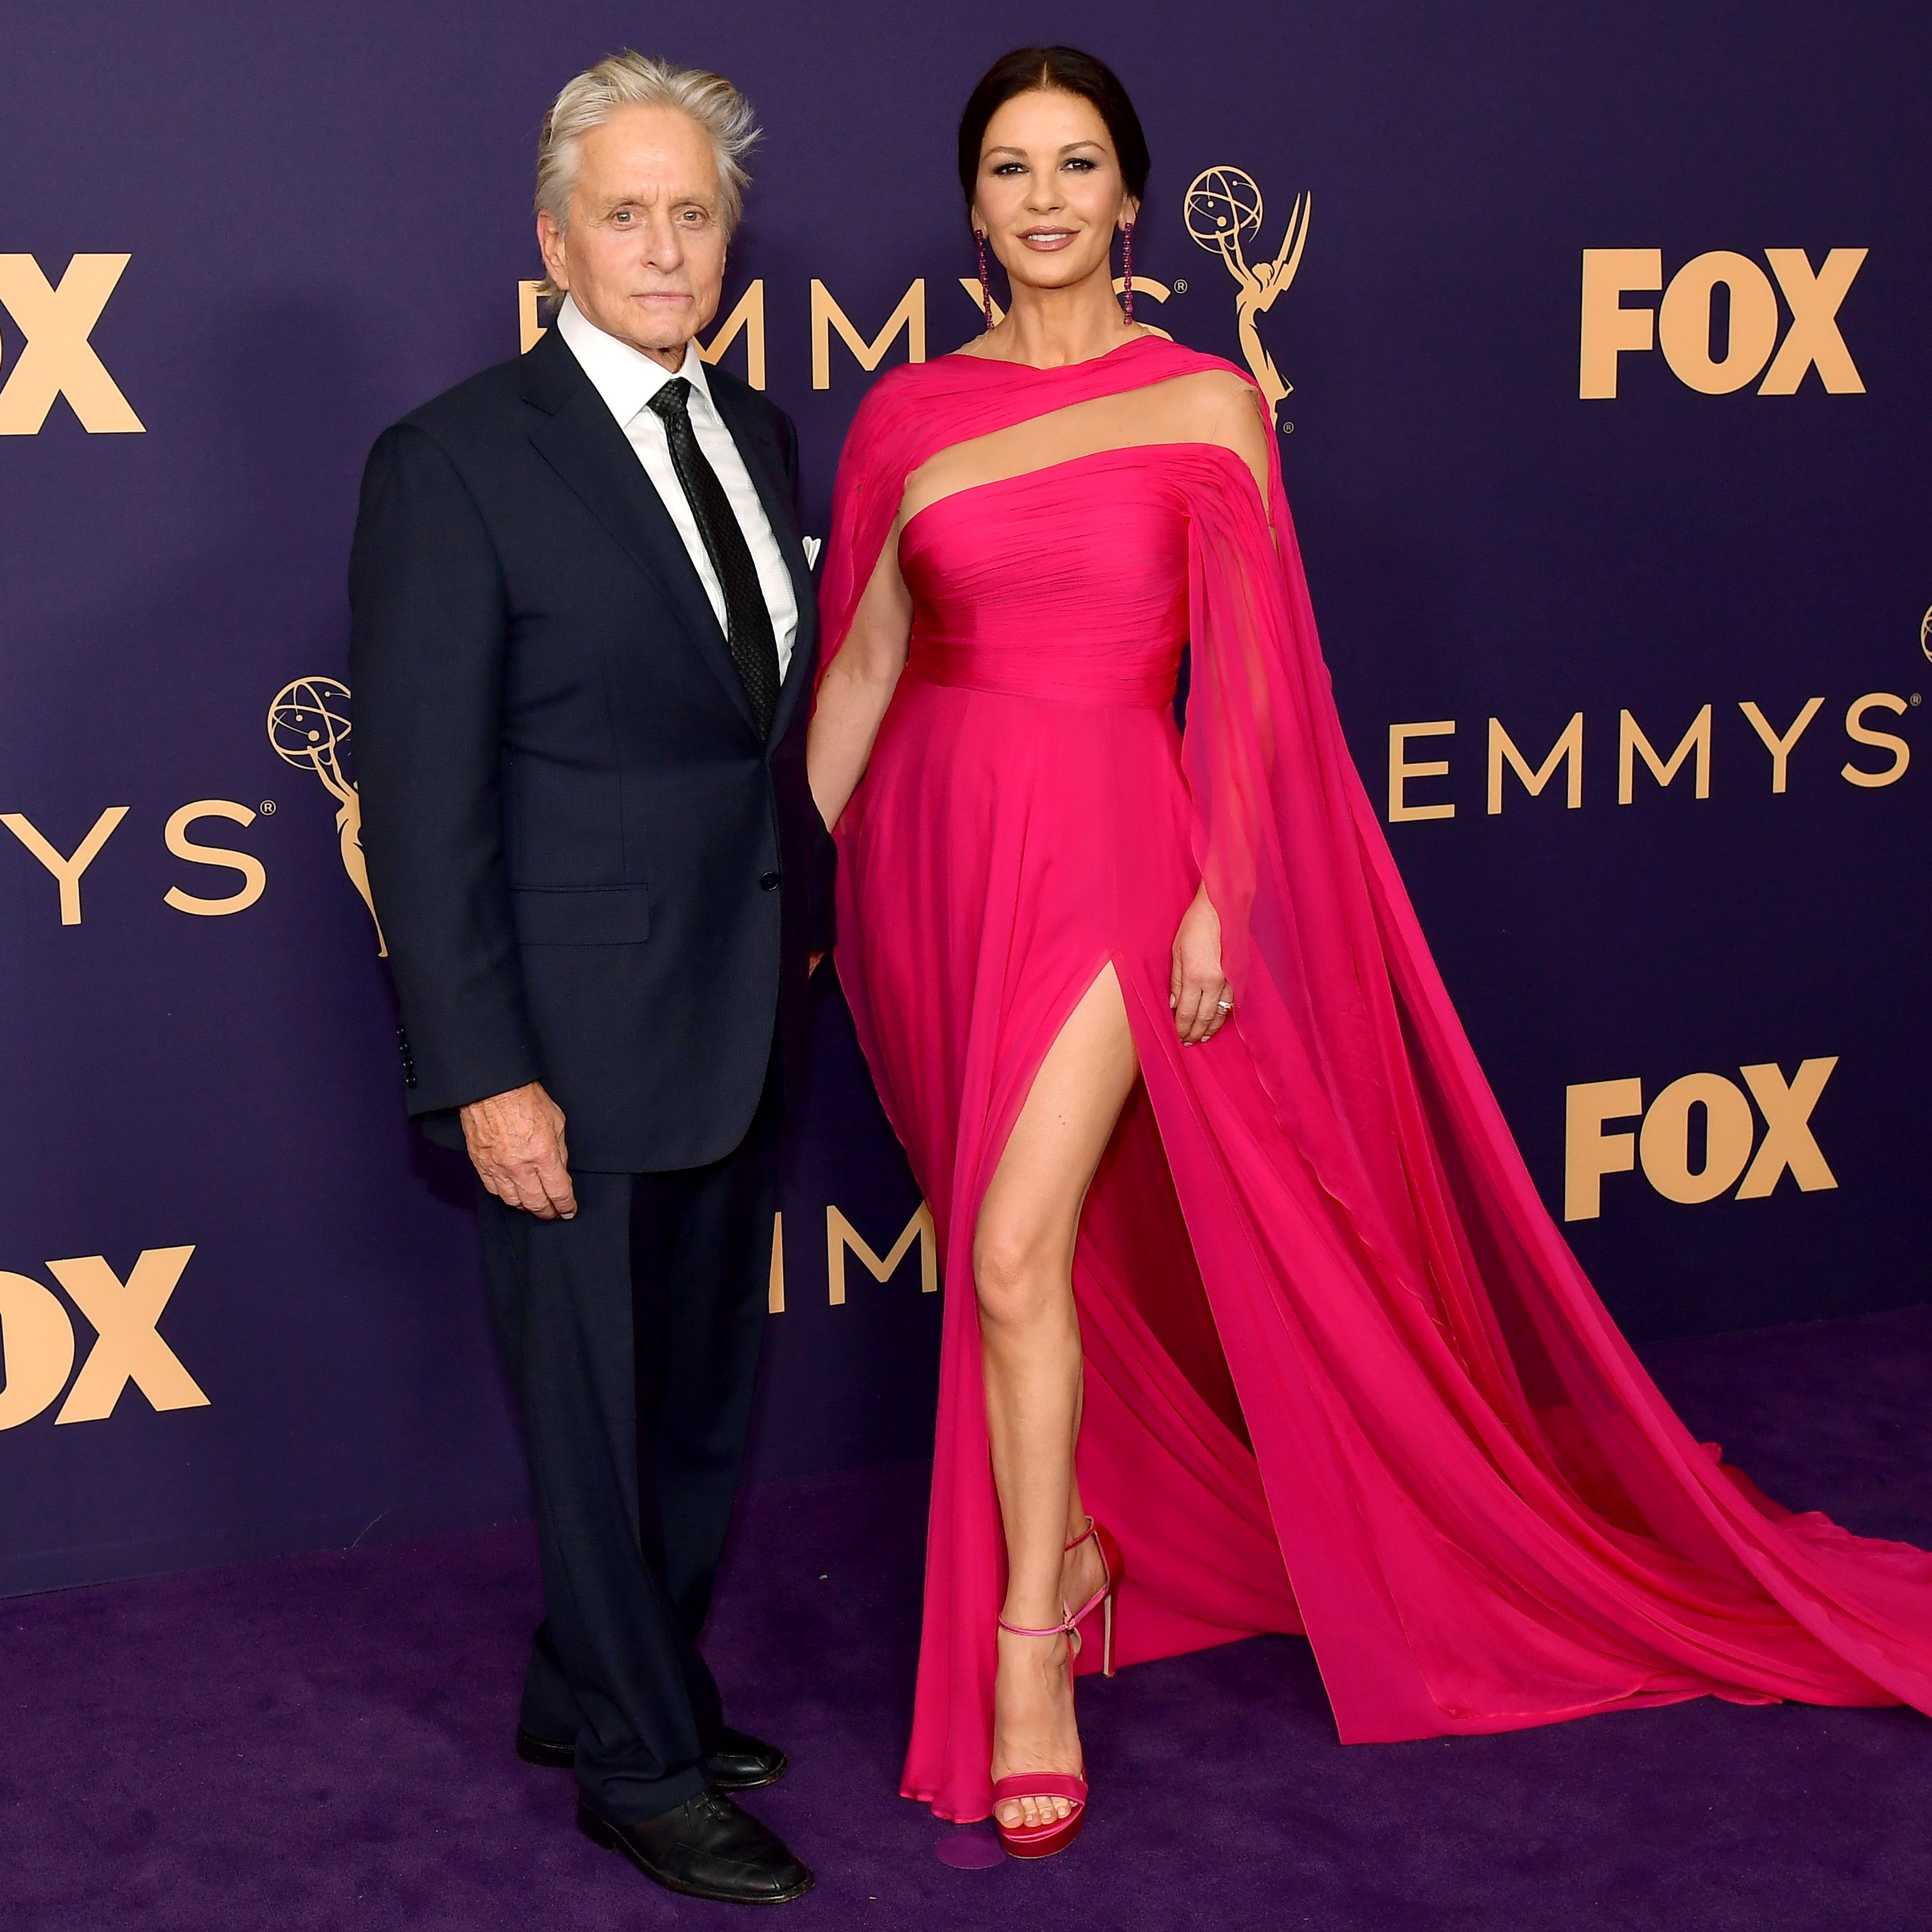 LOS ANGELES, CALIFORNIA - SEPTEMBER 22: (EDITORS NOTE: This image is a retransmission)   Michael Douglas (L) and Catherine Zeta-Jones attend the 71st Emmy Awards on September 22, 2019 in Los Angeles, California. (Photo by Matt Winkelmeyer/Getty Images) (Foto: Getty Images)